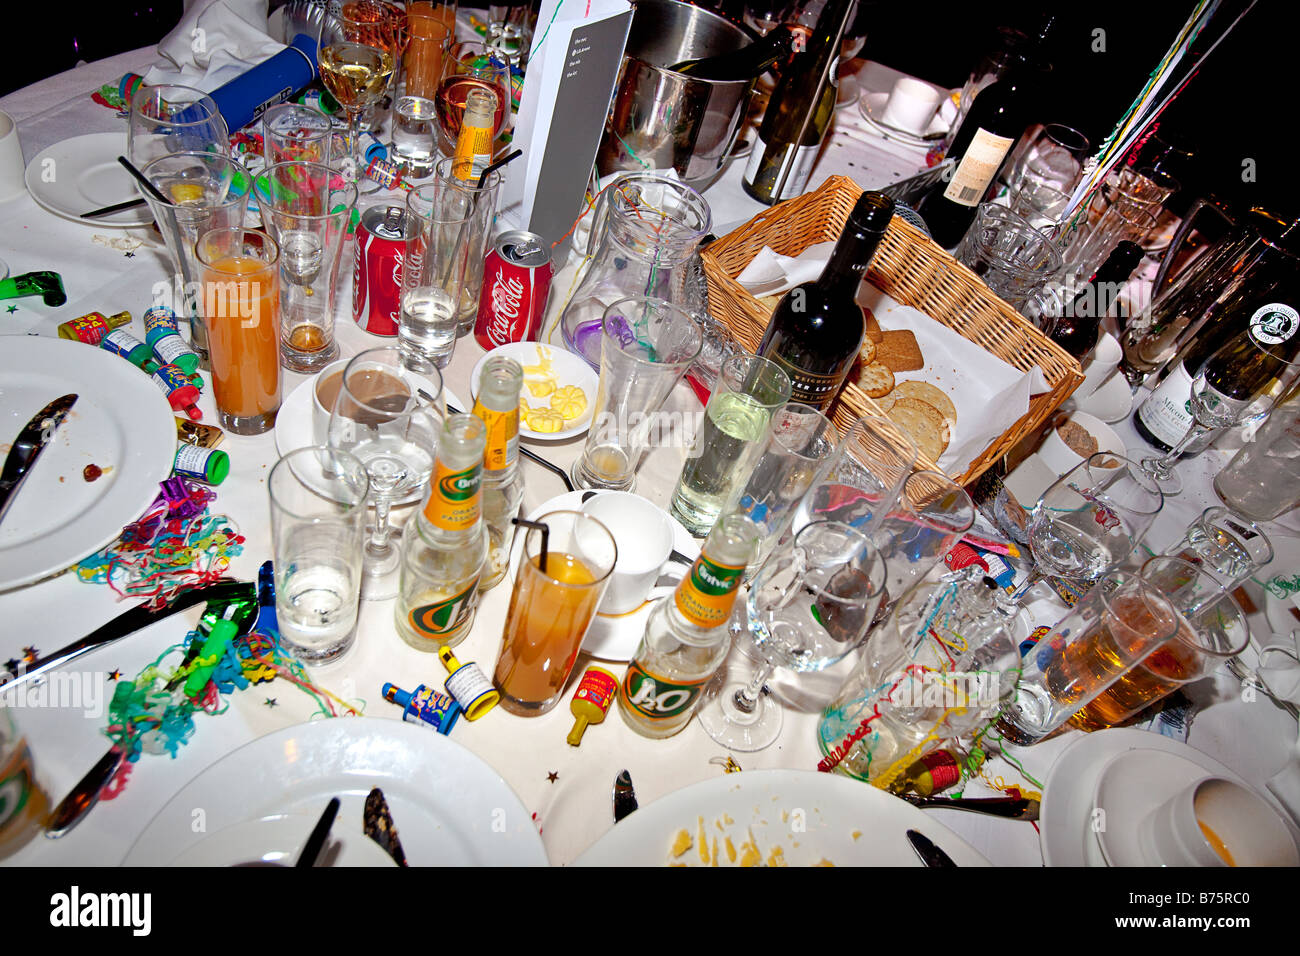 after-the-party-a-table-littered-with-the-after-effects-of-a-dinner-B75RC0.jpg